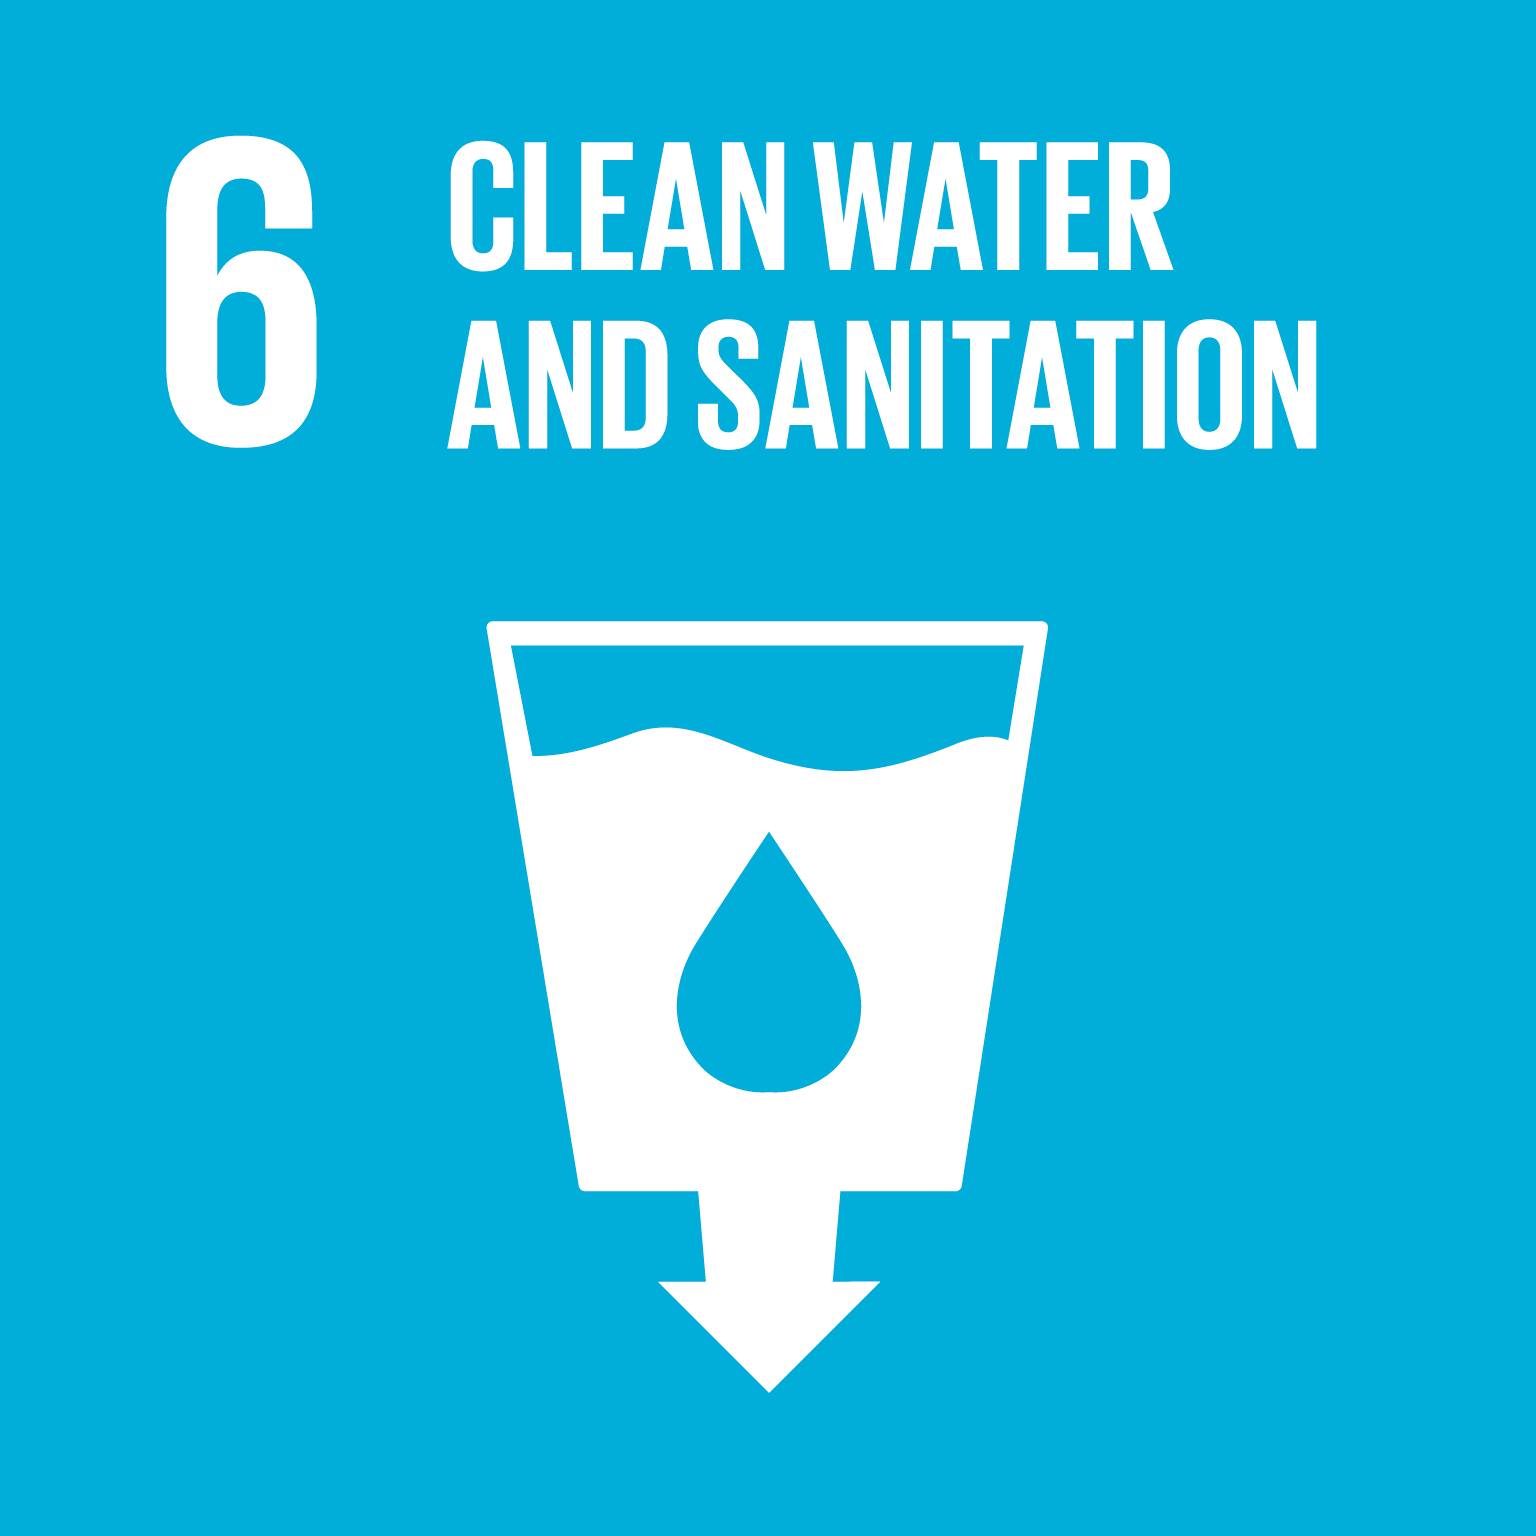 Goal 6: Clean Water, the text of this infographic is listed below